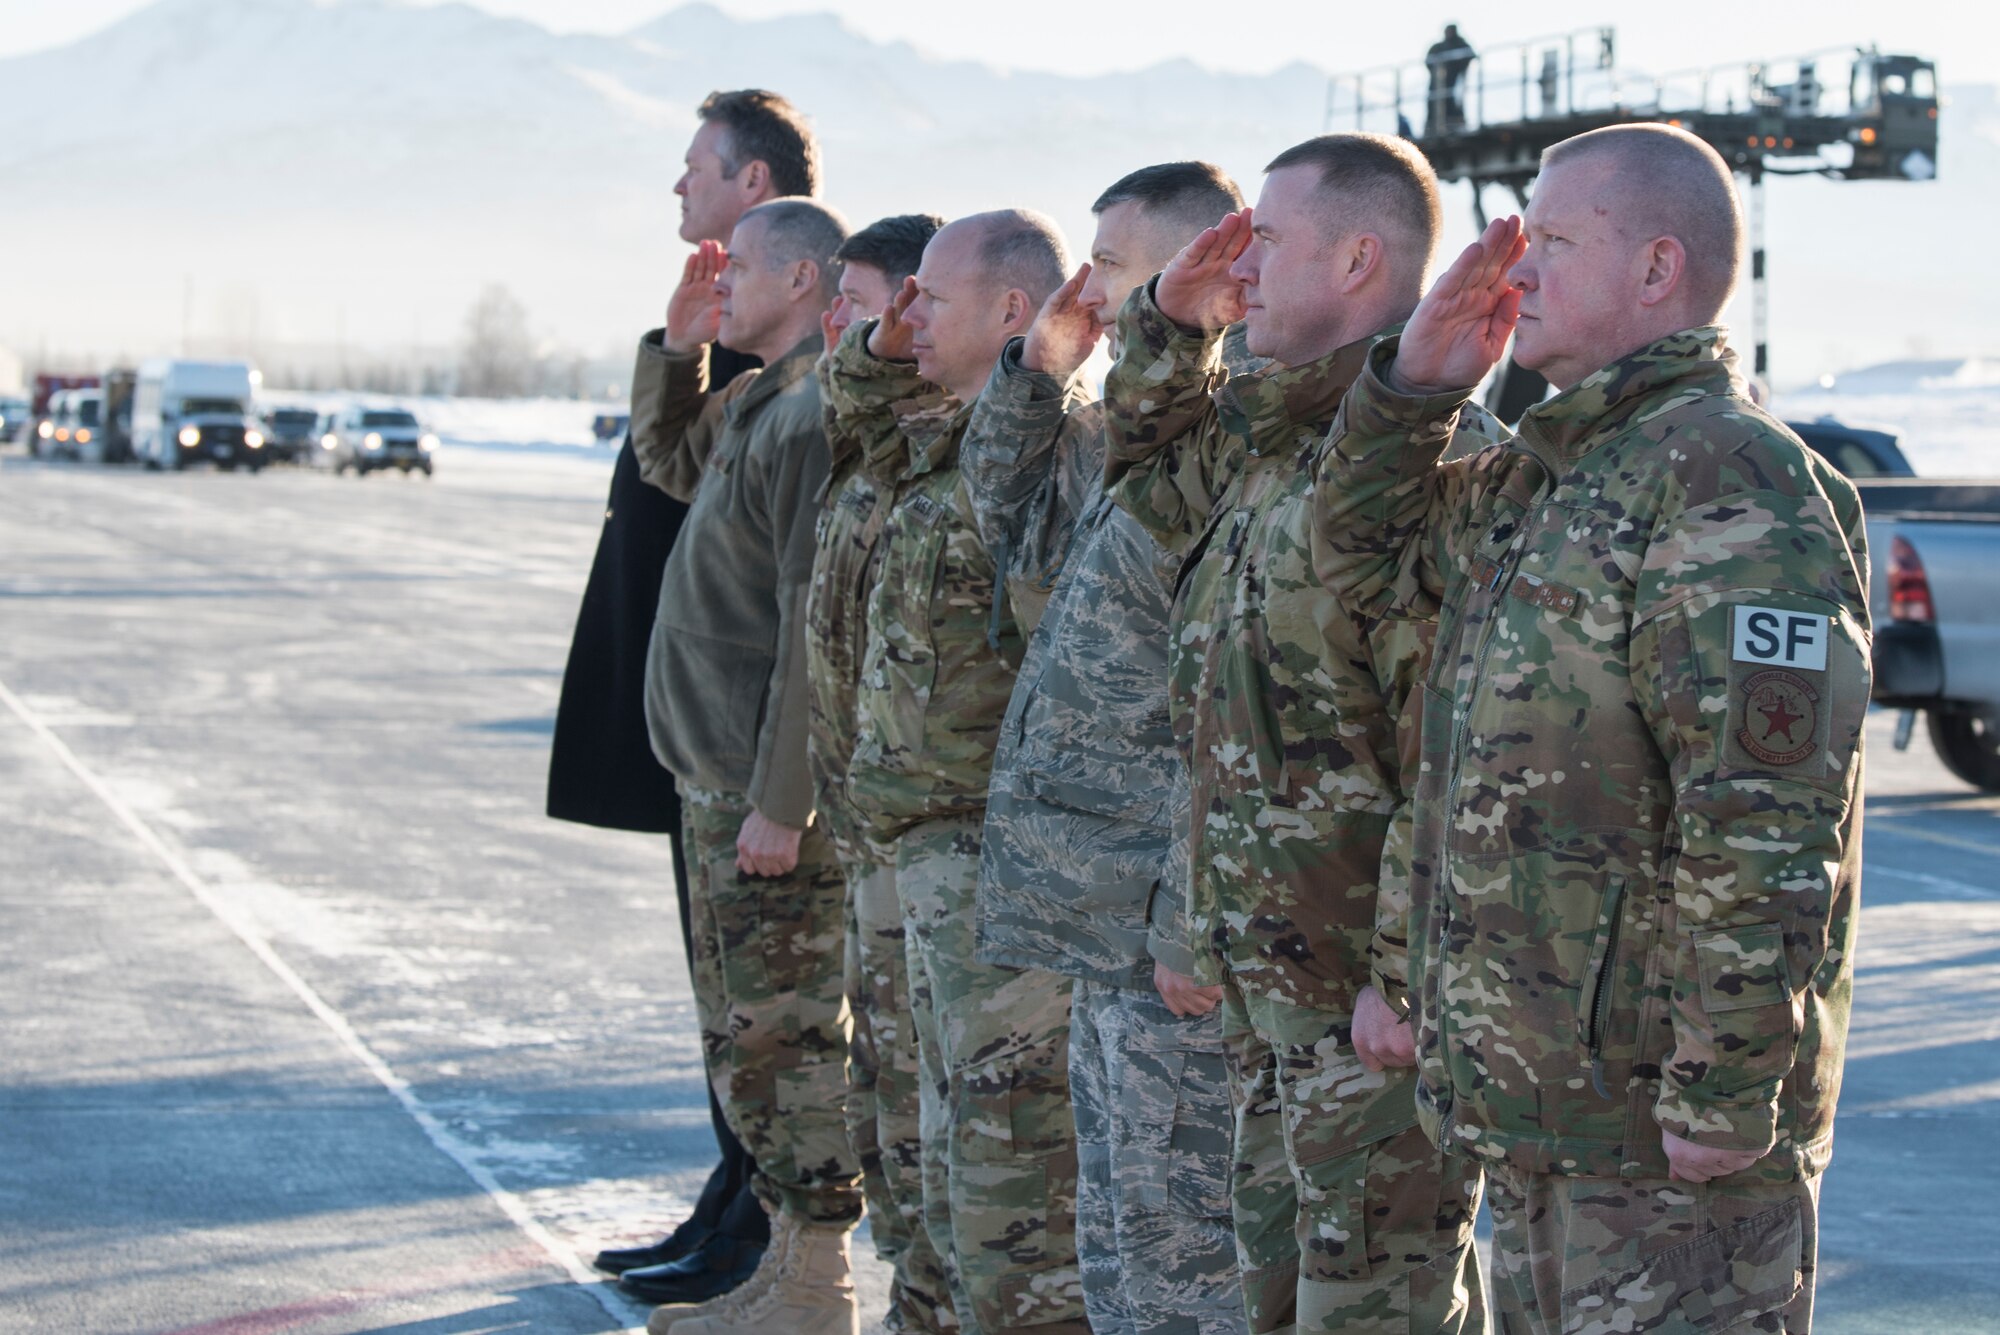 Joint Base Elmendorf-Richardson senior leadership salutes while Alaska Gov. Michael Dunleavy, far left, greets President Donald Trump following his arrival to JBER, Alaska, Feb. 28, 2019. The president talked to more than 100 personnel while his plane refueled before continuing his travel to Joint Base Andrews, Maryland.